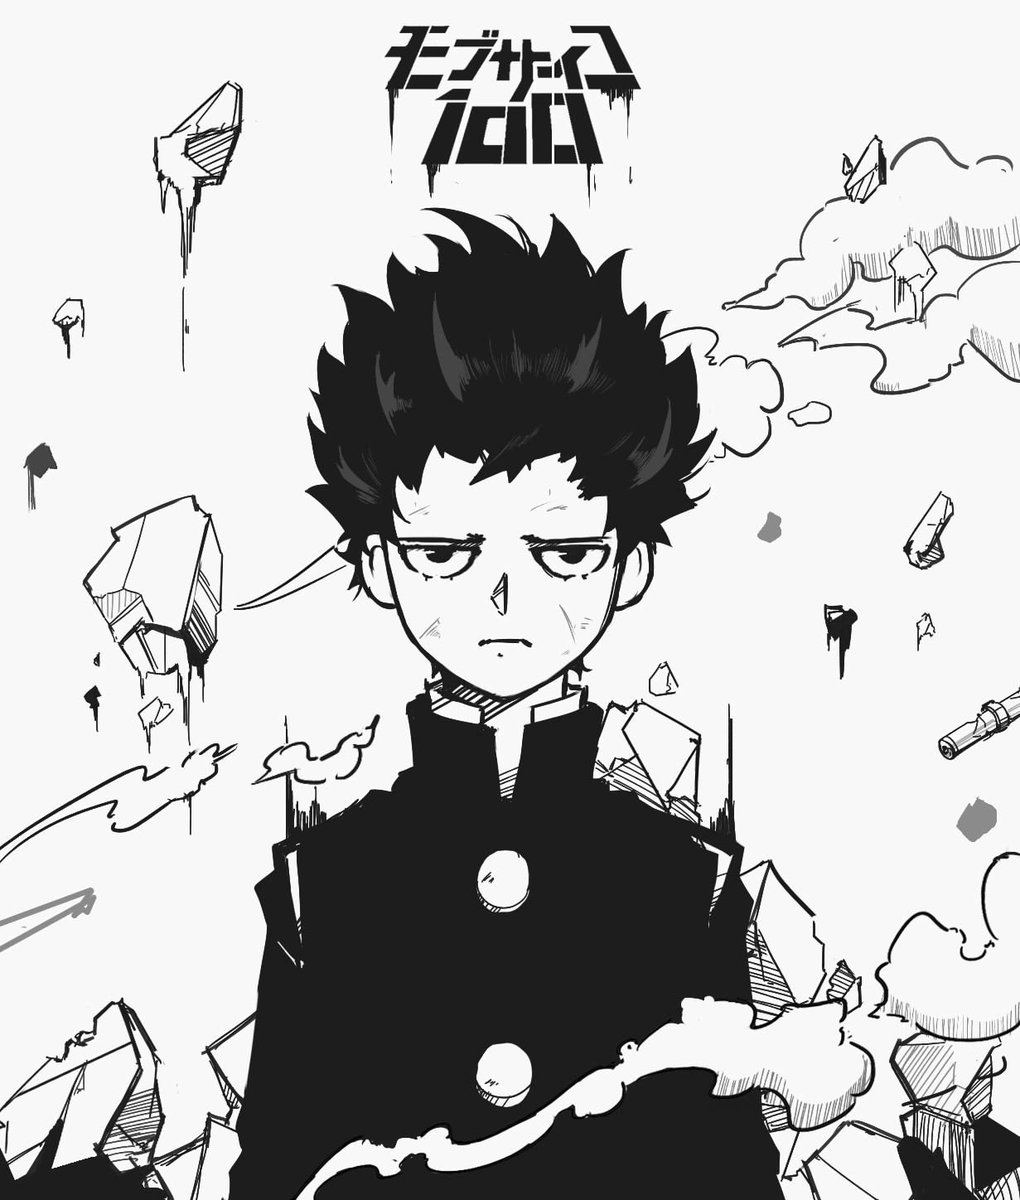 Who also likes mob psycho 100? Need tips for colouring the hair black. -  9GAG